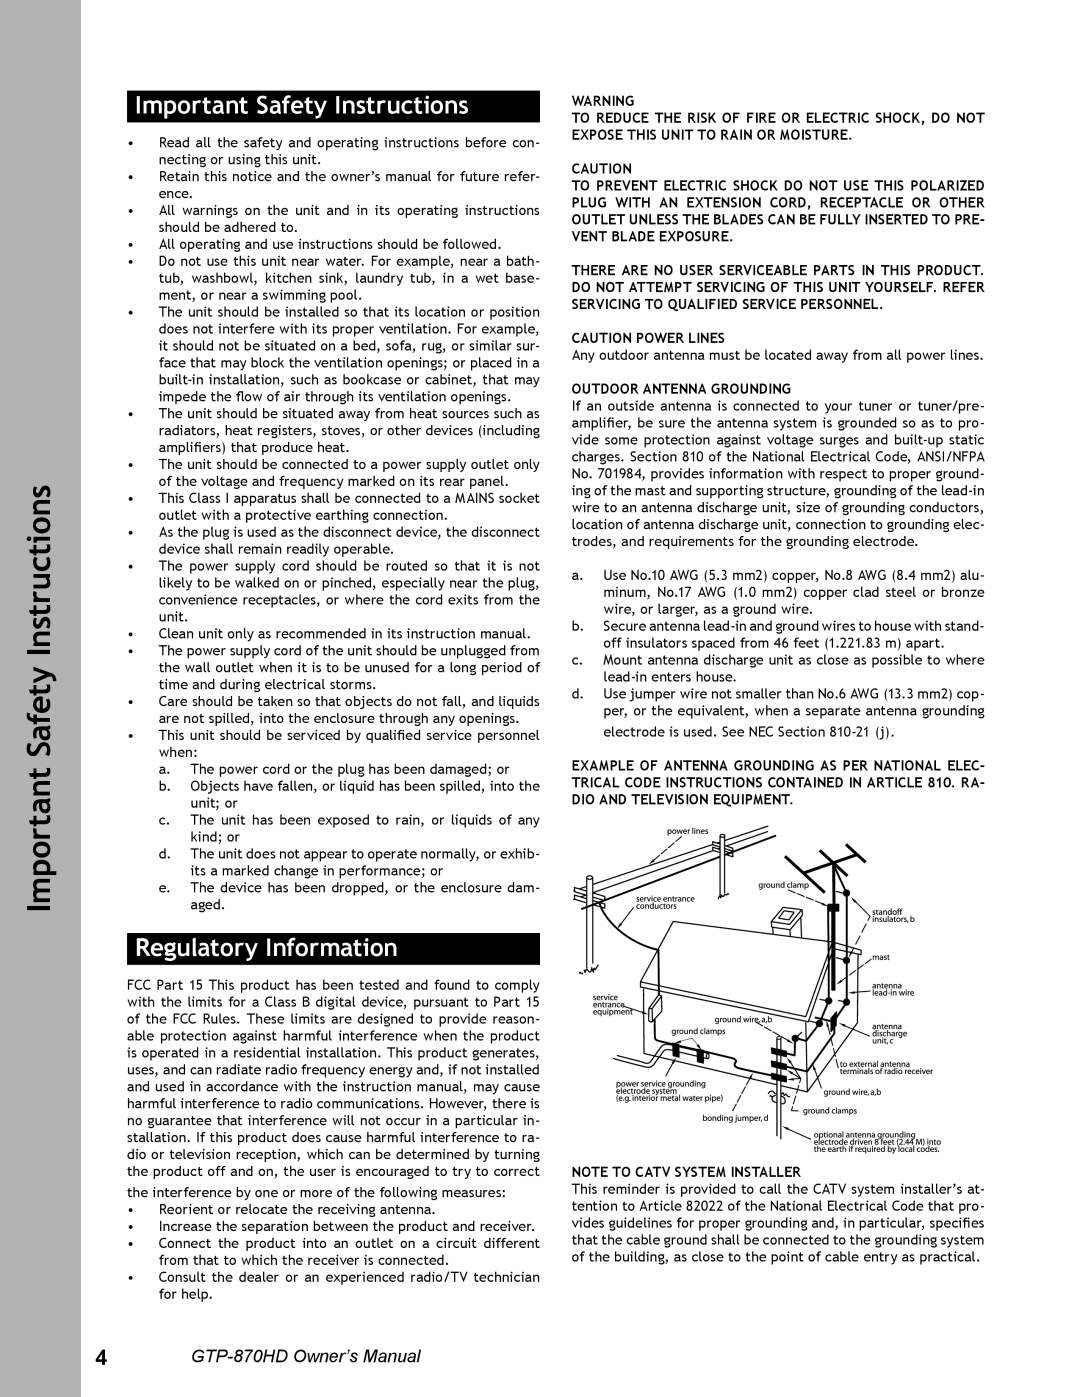 Adcom GTP-870HD user manual Important Safety Instructions, Regulatory Information 